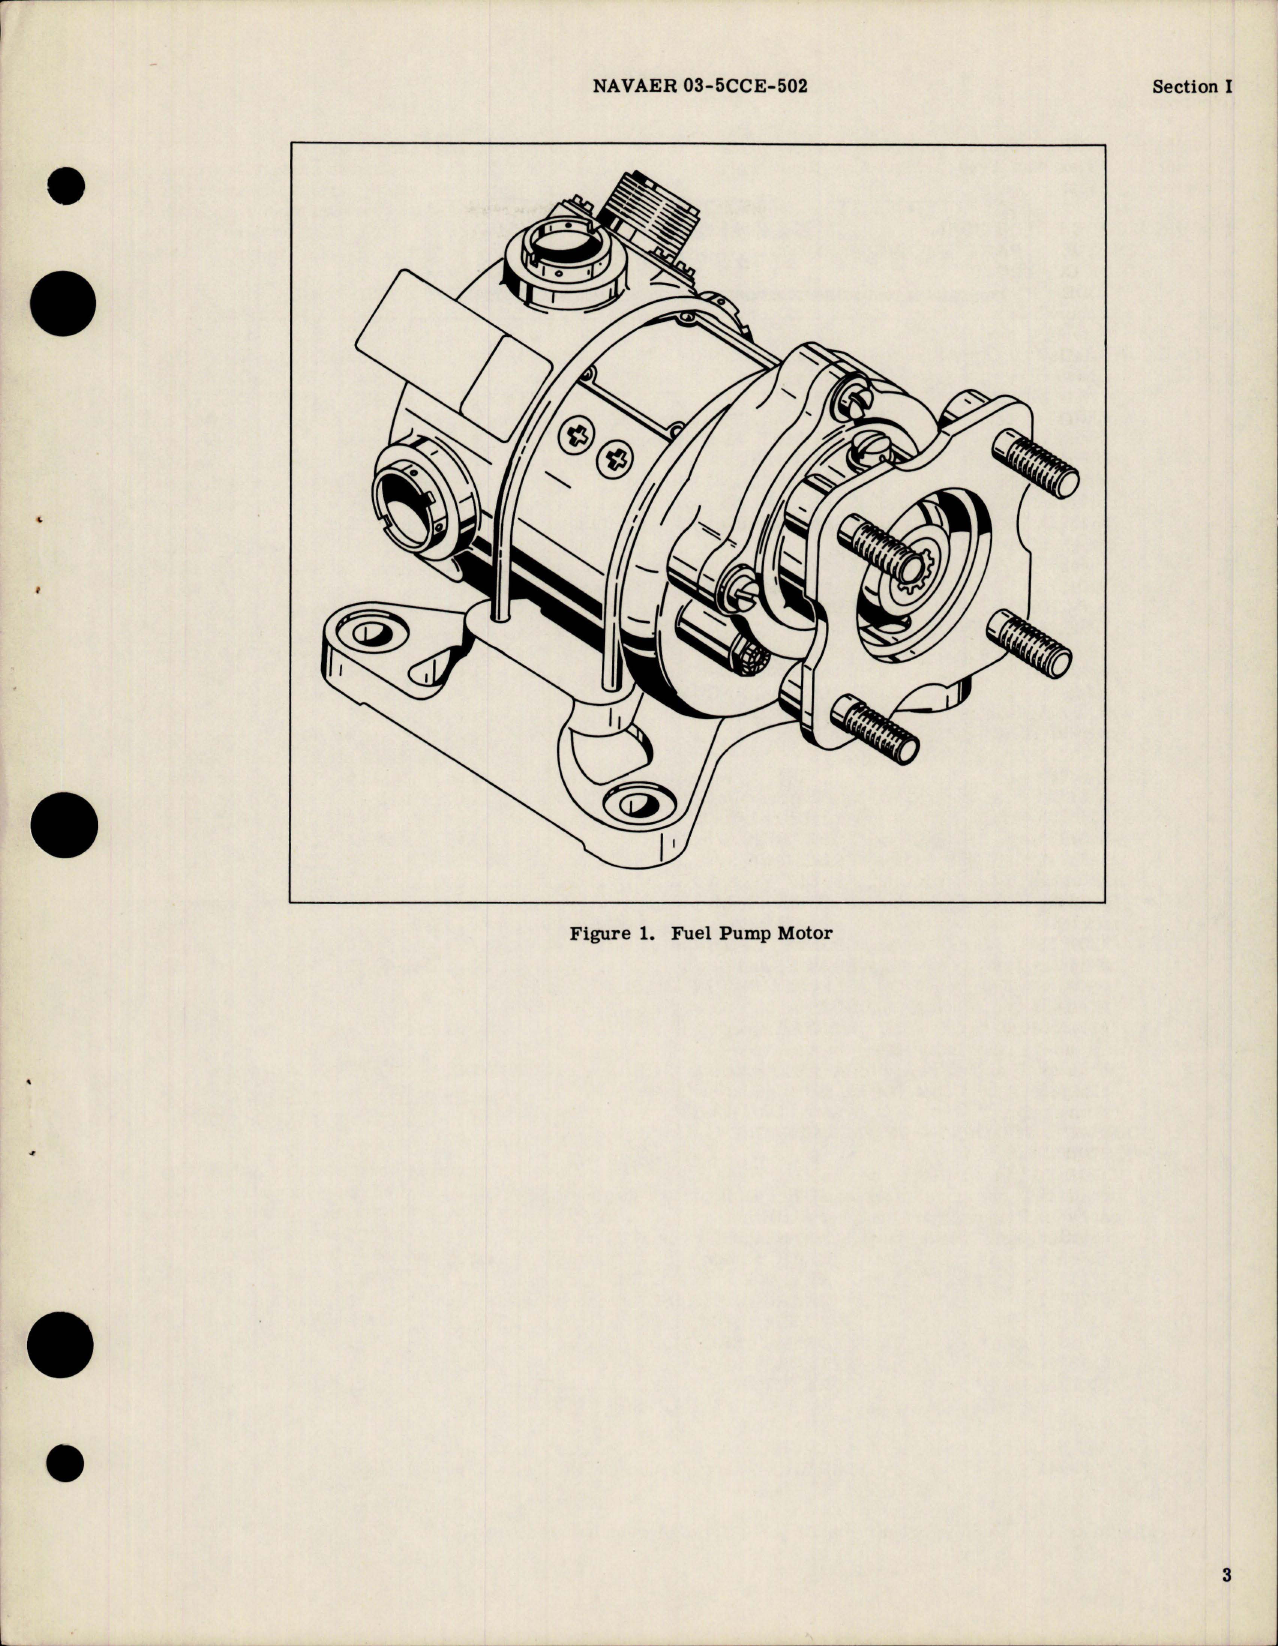 Sample page 5 from AirCorps Library document: Illustrated Parts Breakdown for Motor Assembly - A8574A1